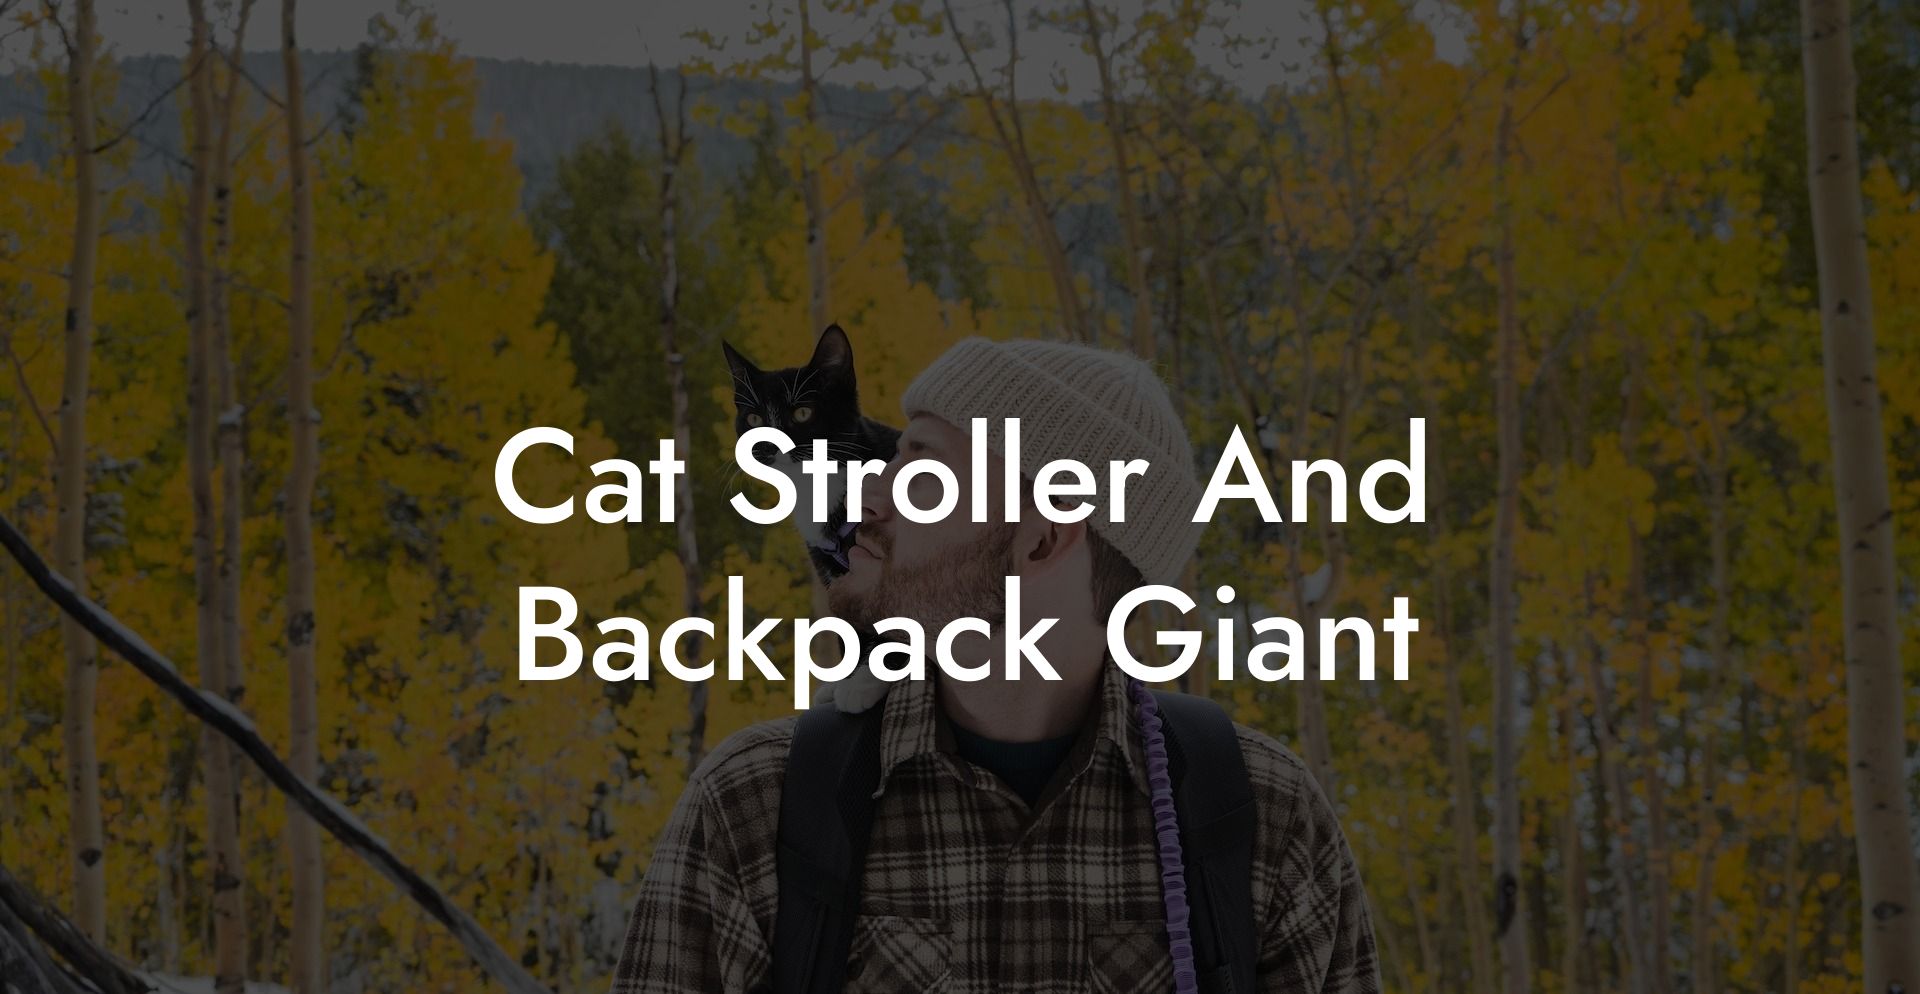 Cat Stroller And Backpack Giant